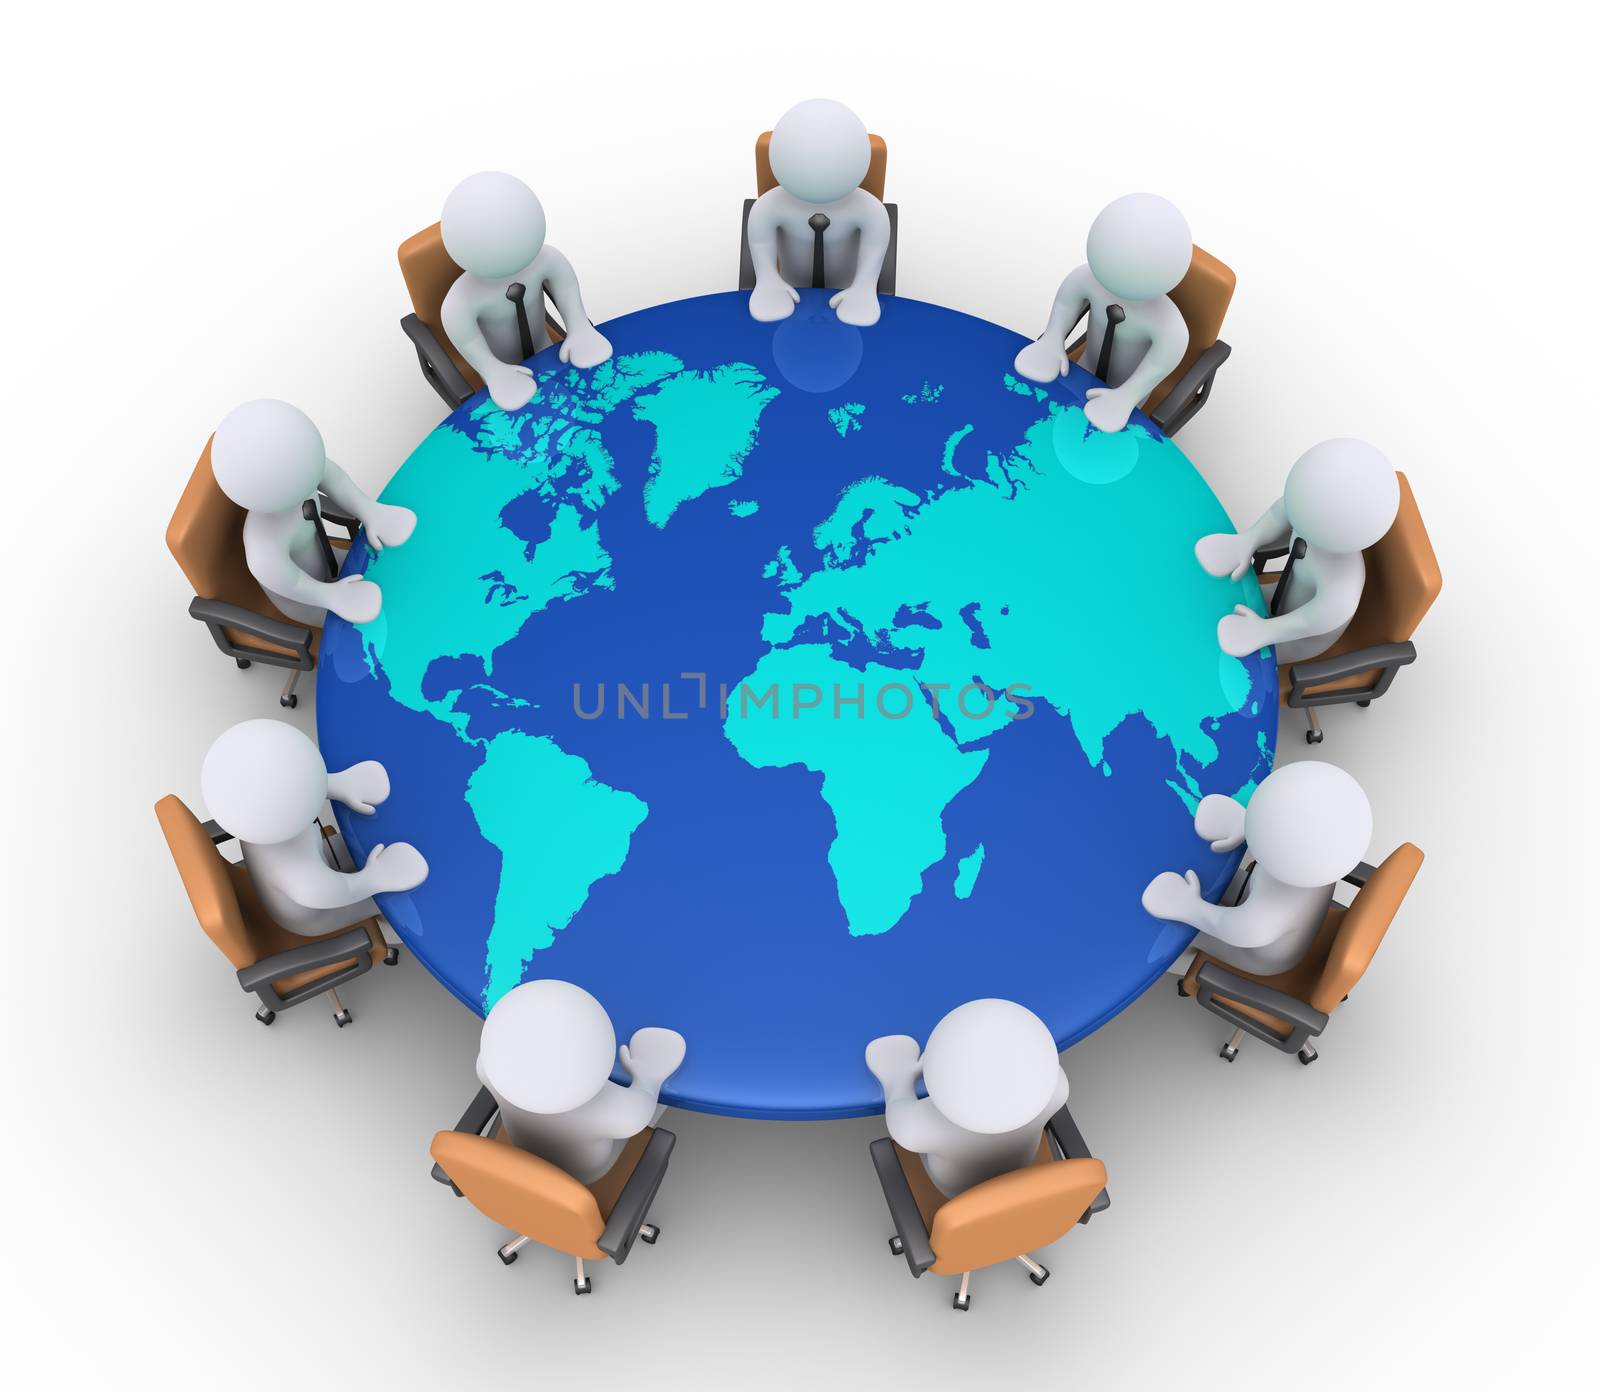 Businessmen sitting on chairs and table with world map by 6kor3dos